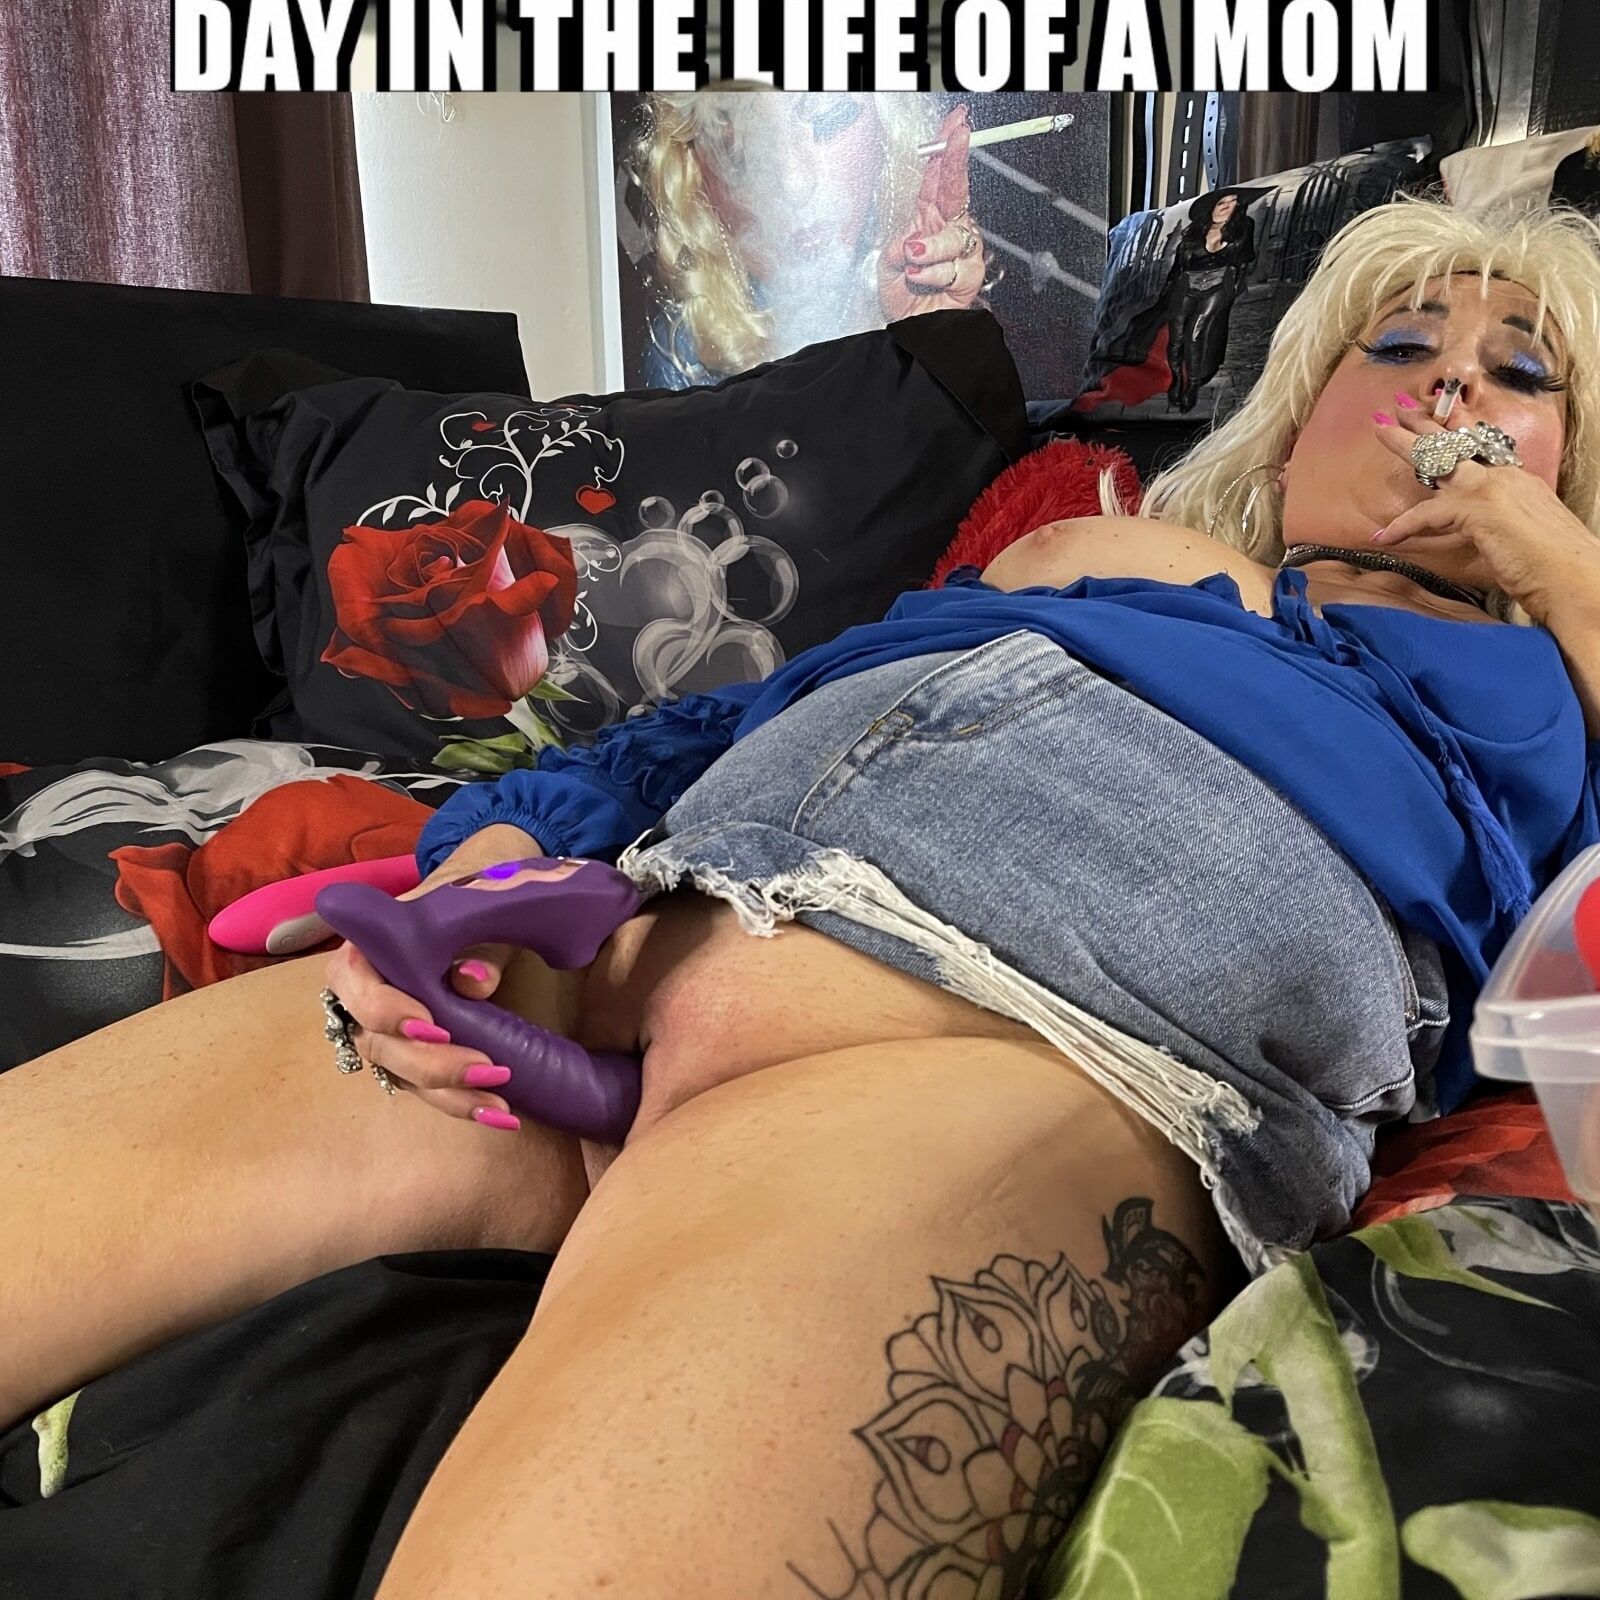 DAY IN THE LIFE OF A MOM SHIRLEY #44